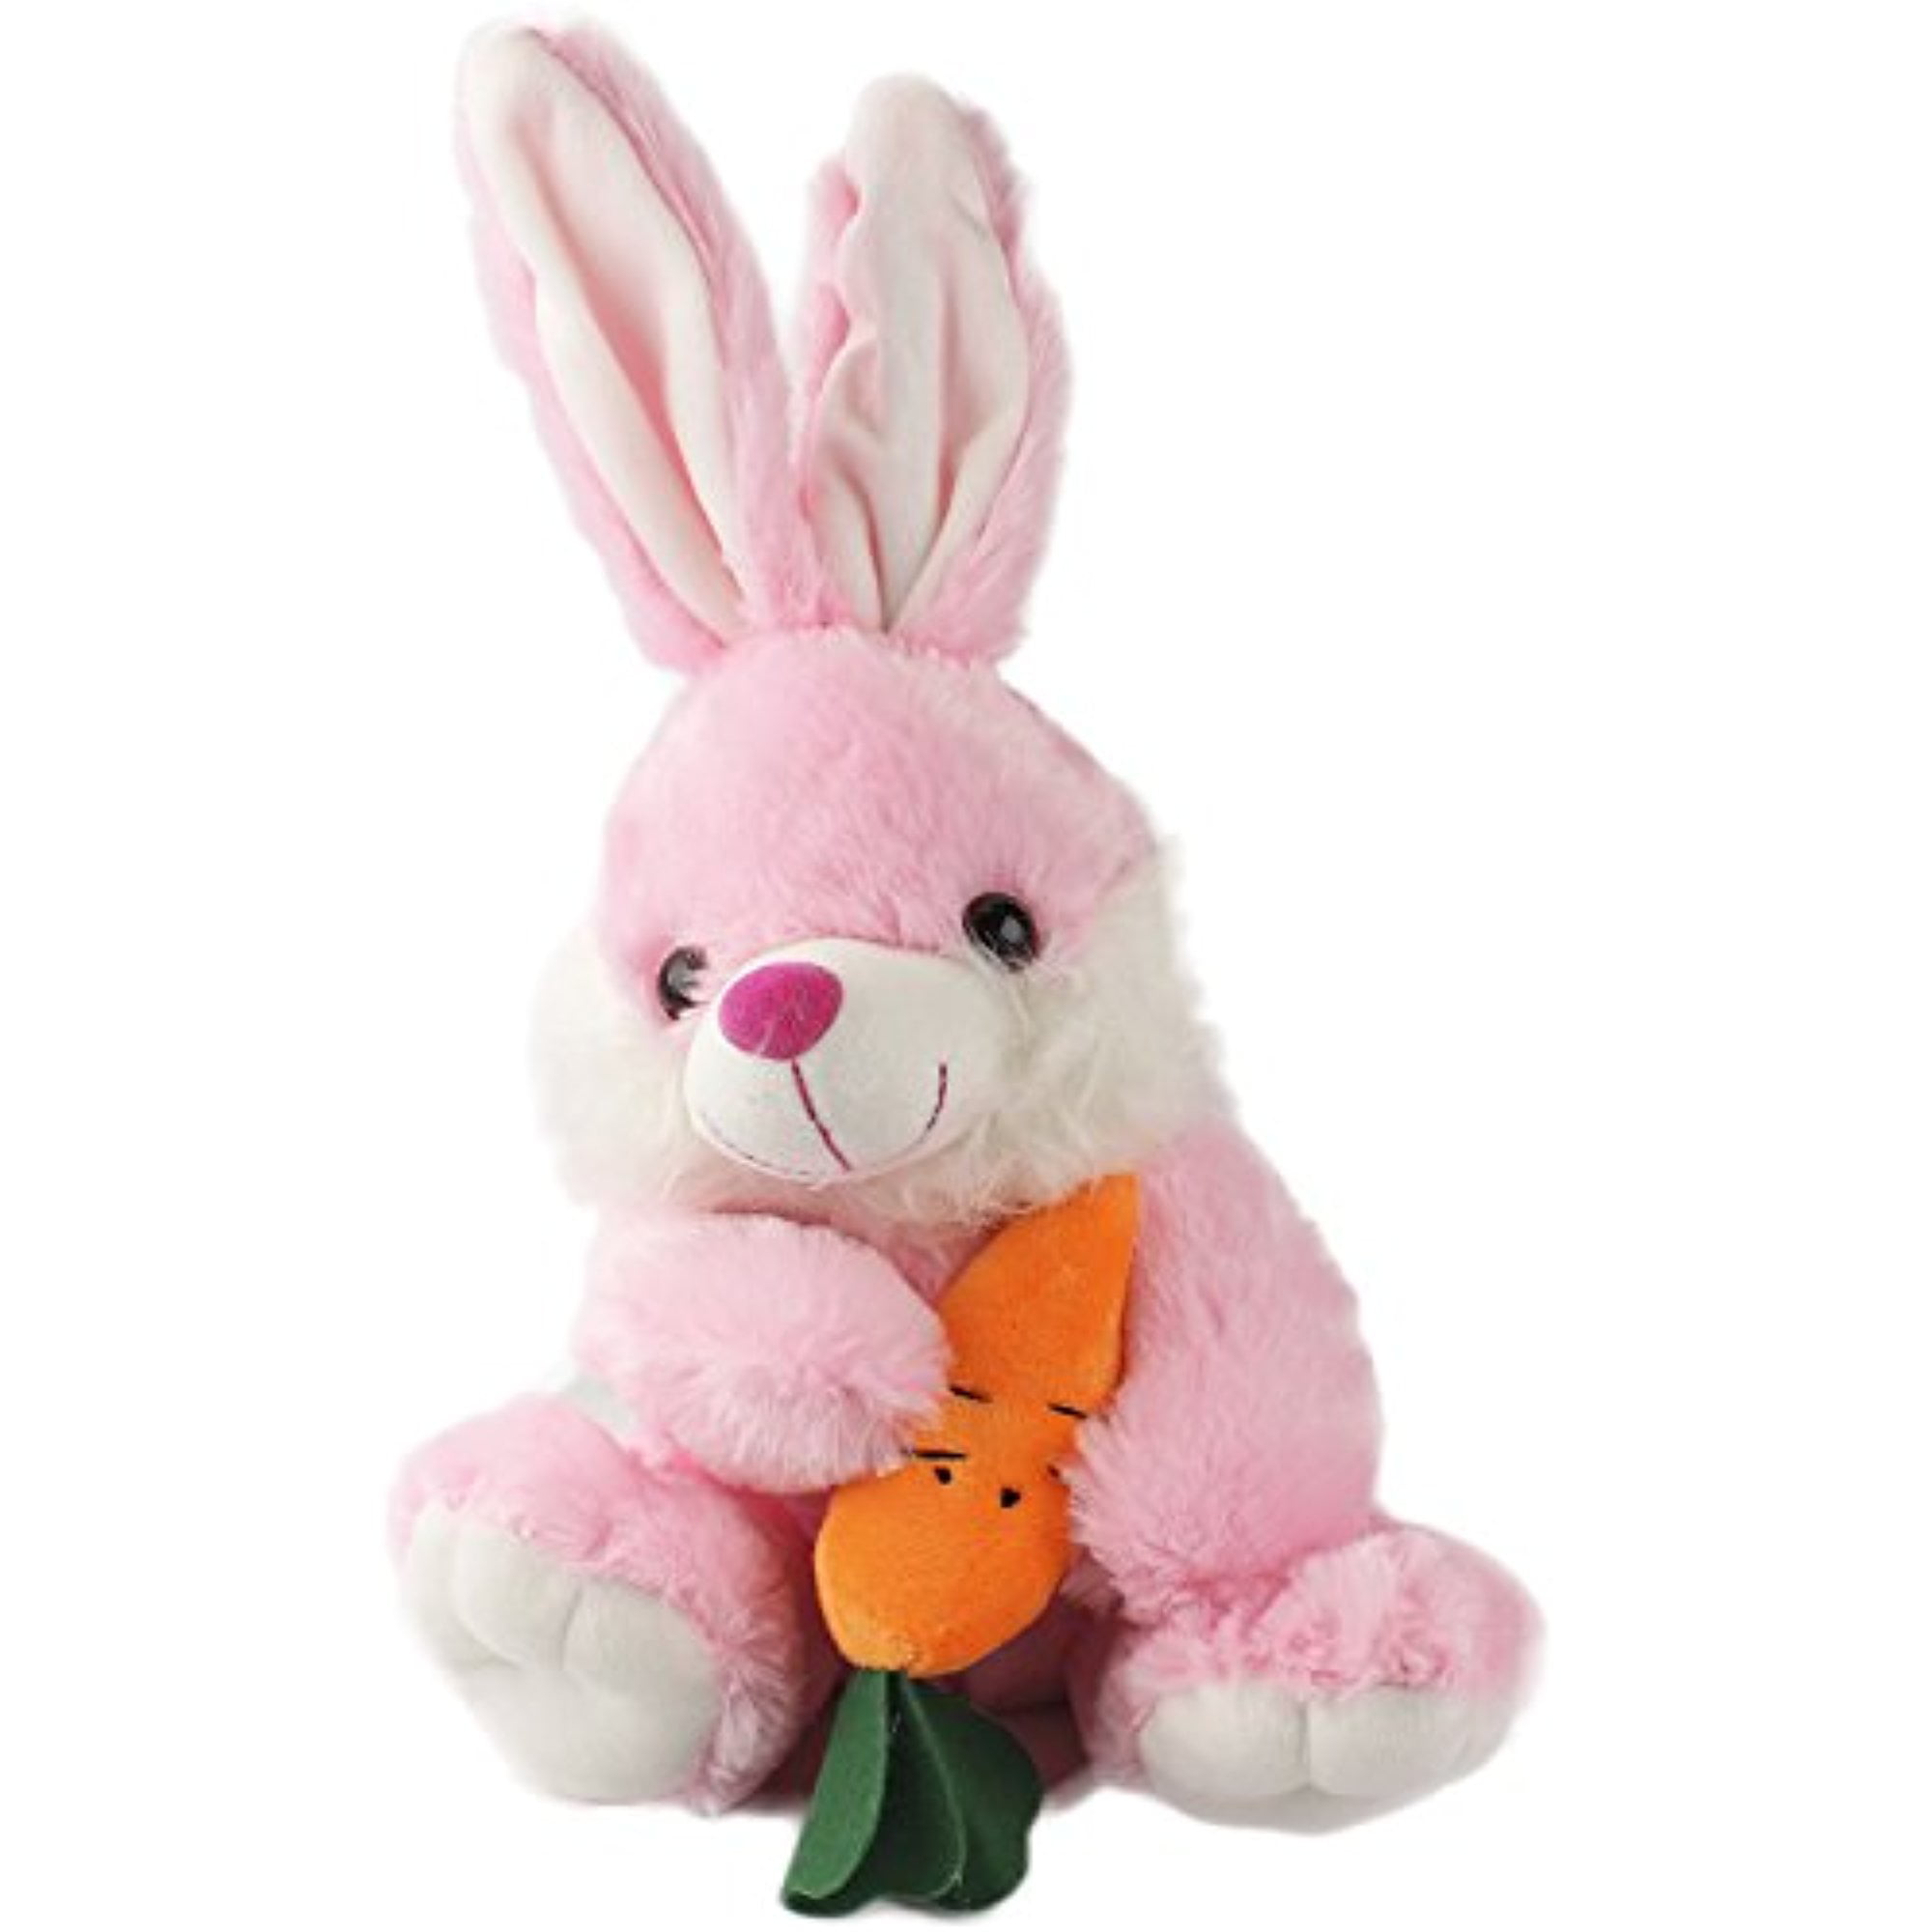 Easter HOT PINK Overalls & Bunny Plush Feet Basket with Carrot & BONUS NEW L-38 